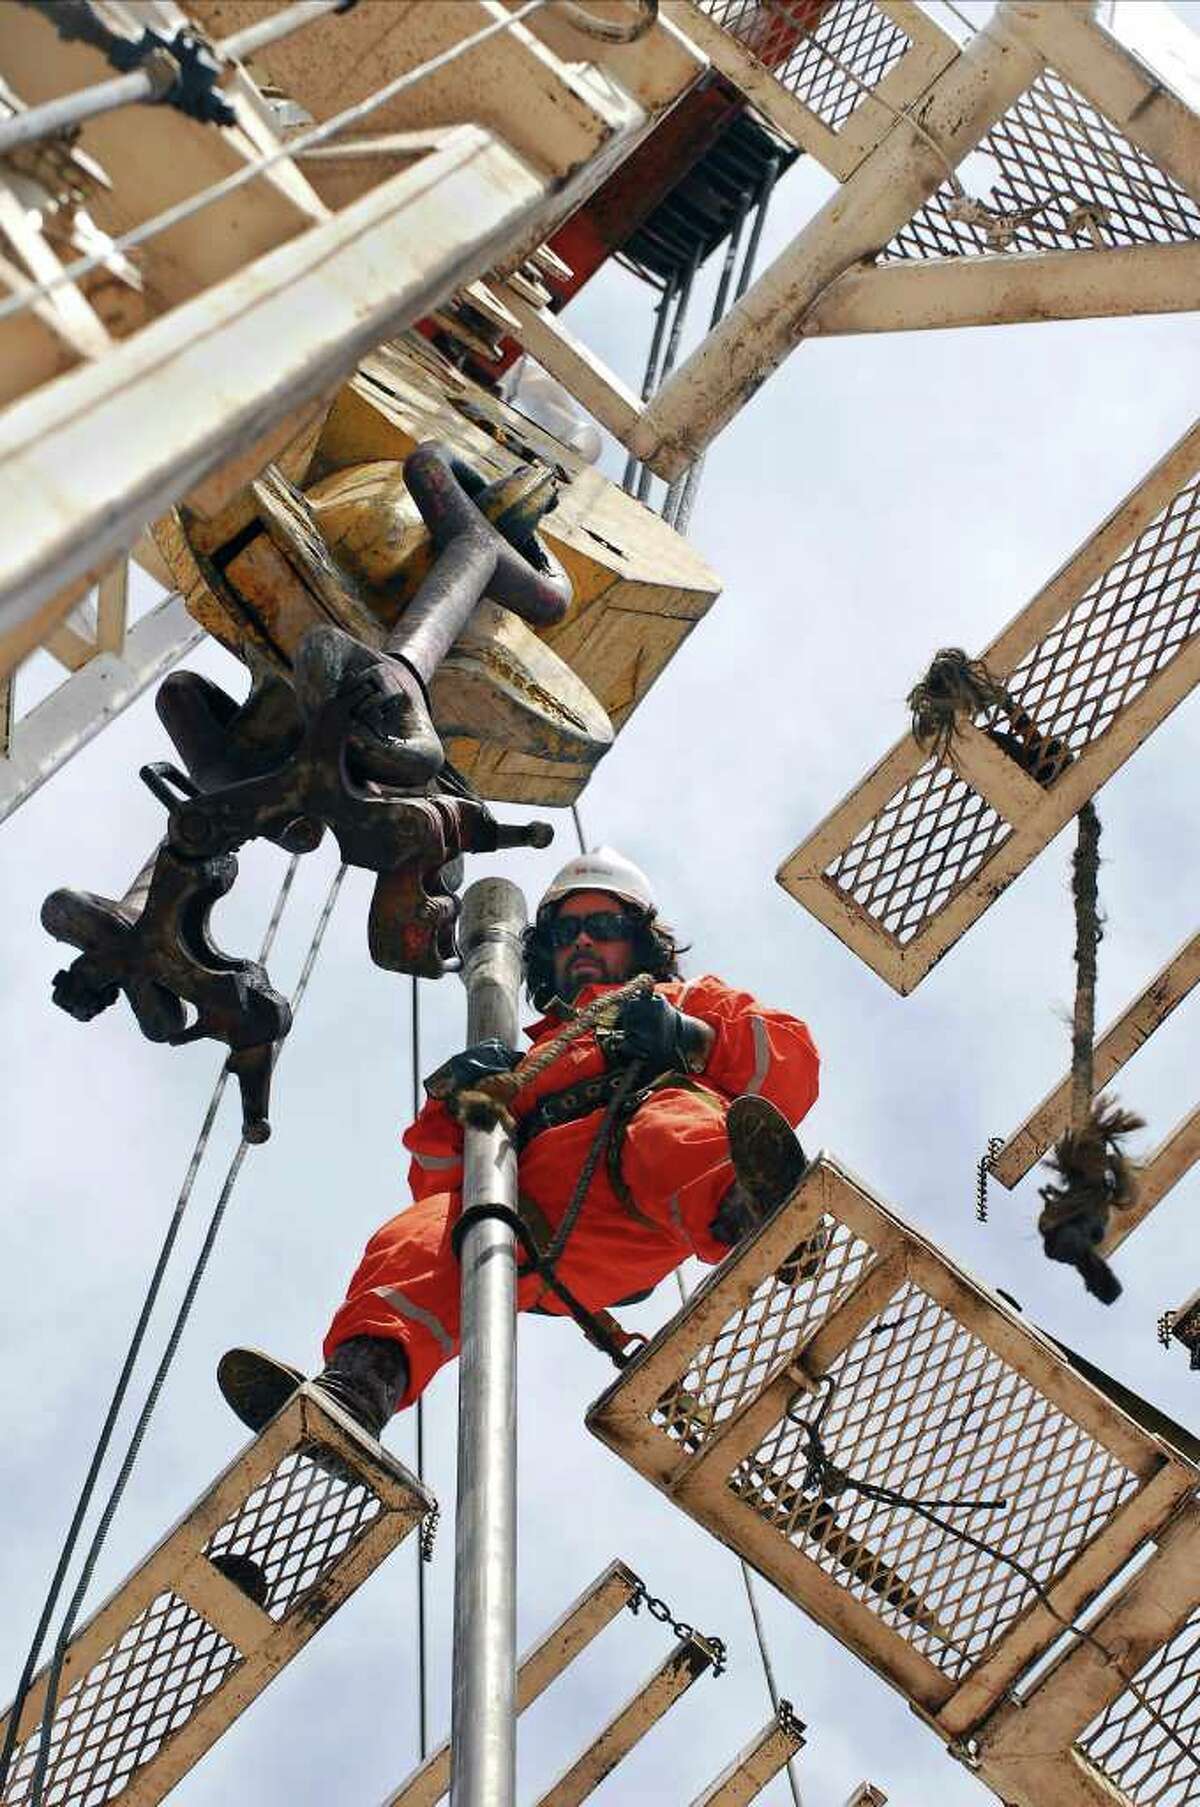 In this picture taken Nov. 24, 2009, an oil worker works on an oil drill in the province of Neuquen, Argentina. Argentina is promoting a new era of mining and energy production, welcoming billions of dollars in foreign investment to unlock huge new reserves of natural gas, oil, gold, lithium and other metals once thought to be unprofitable or out of reach. But there's one factor threatening this resource boom, something politicians and energy executives rarely mention: Huge amounts of fresh water will be required to extract these resources, in a country where water scarcity has long held back development and 16 percent of households still aren't connected to publicly treated drinking water. (AP Photo/Leonardo Petricio)